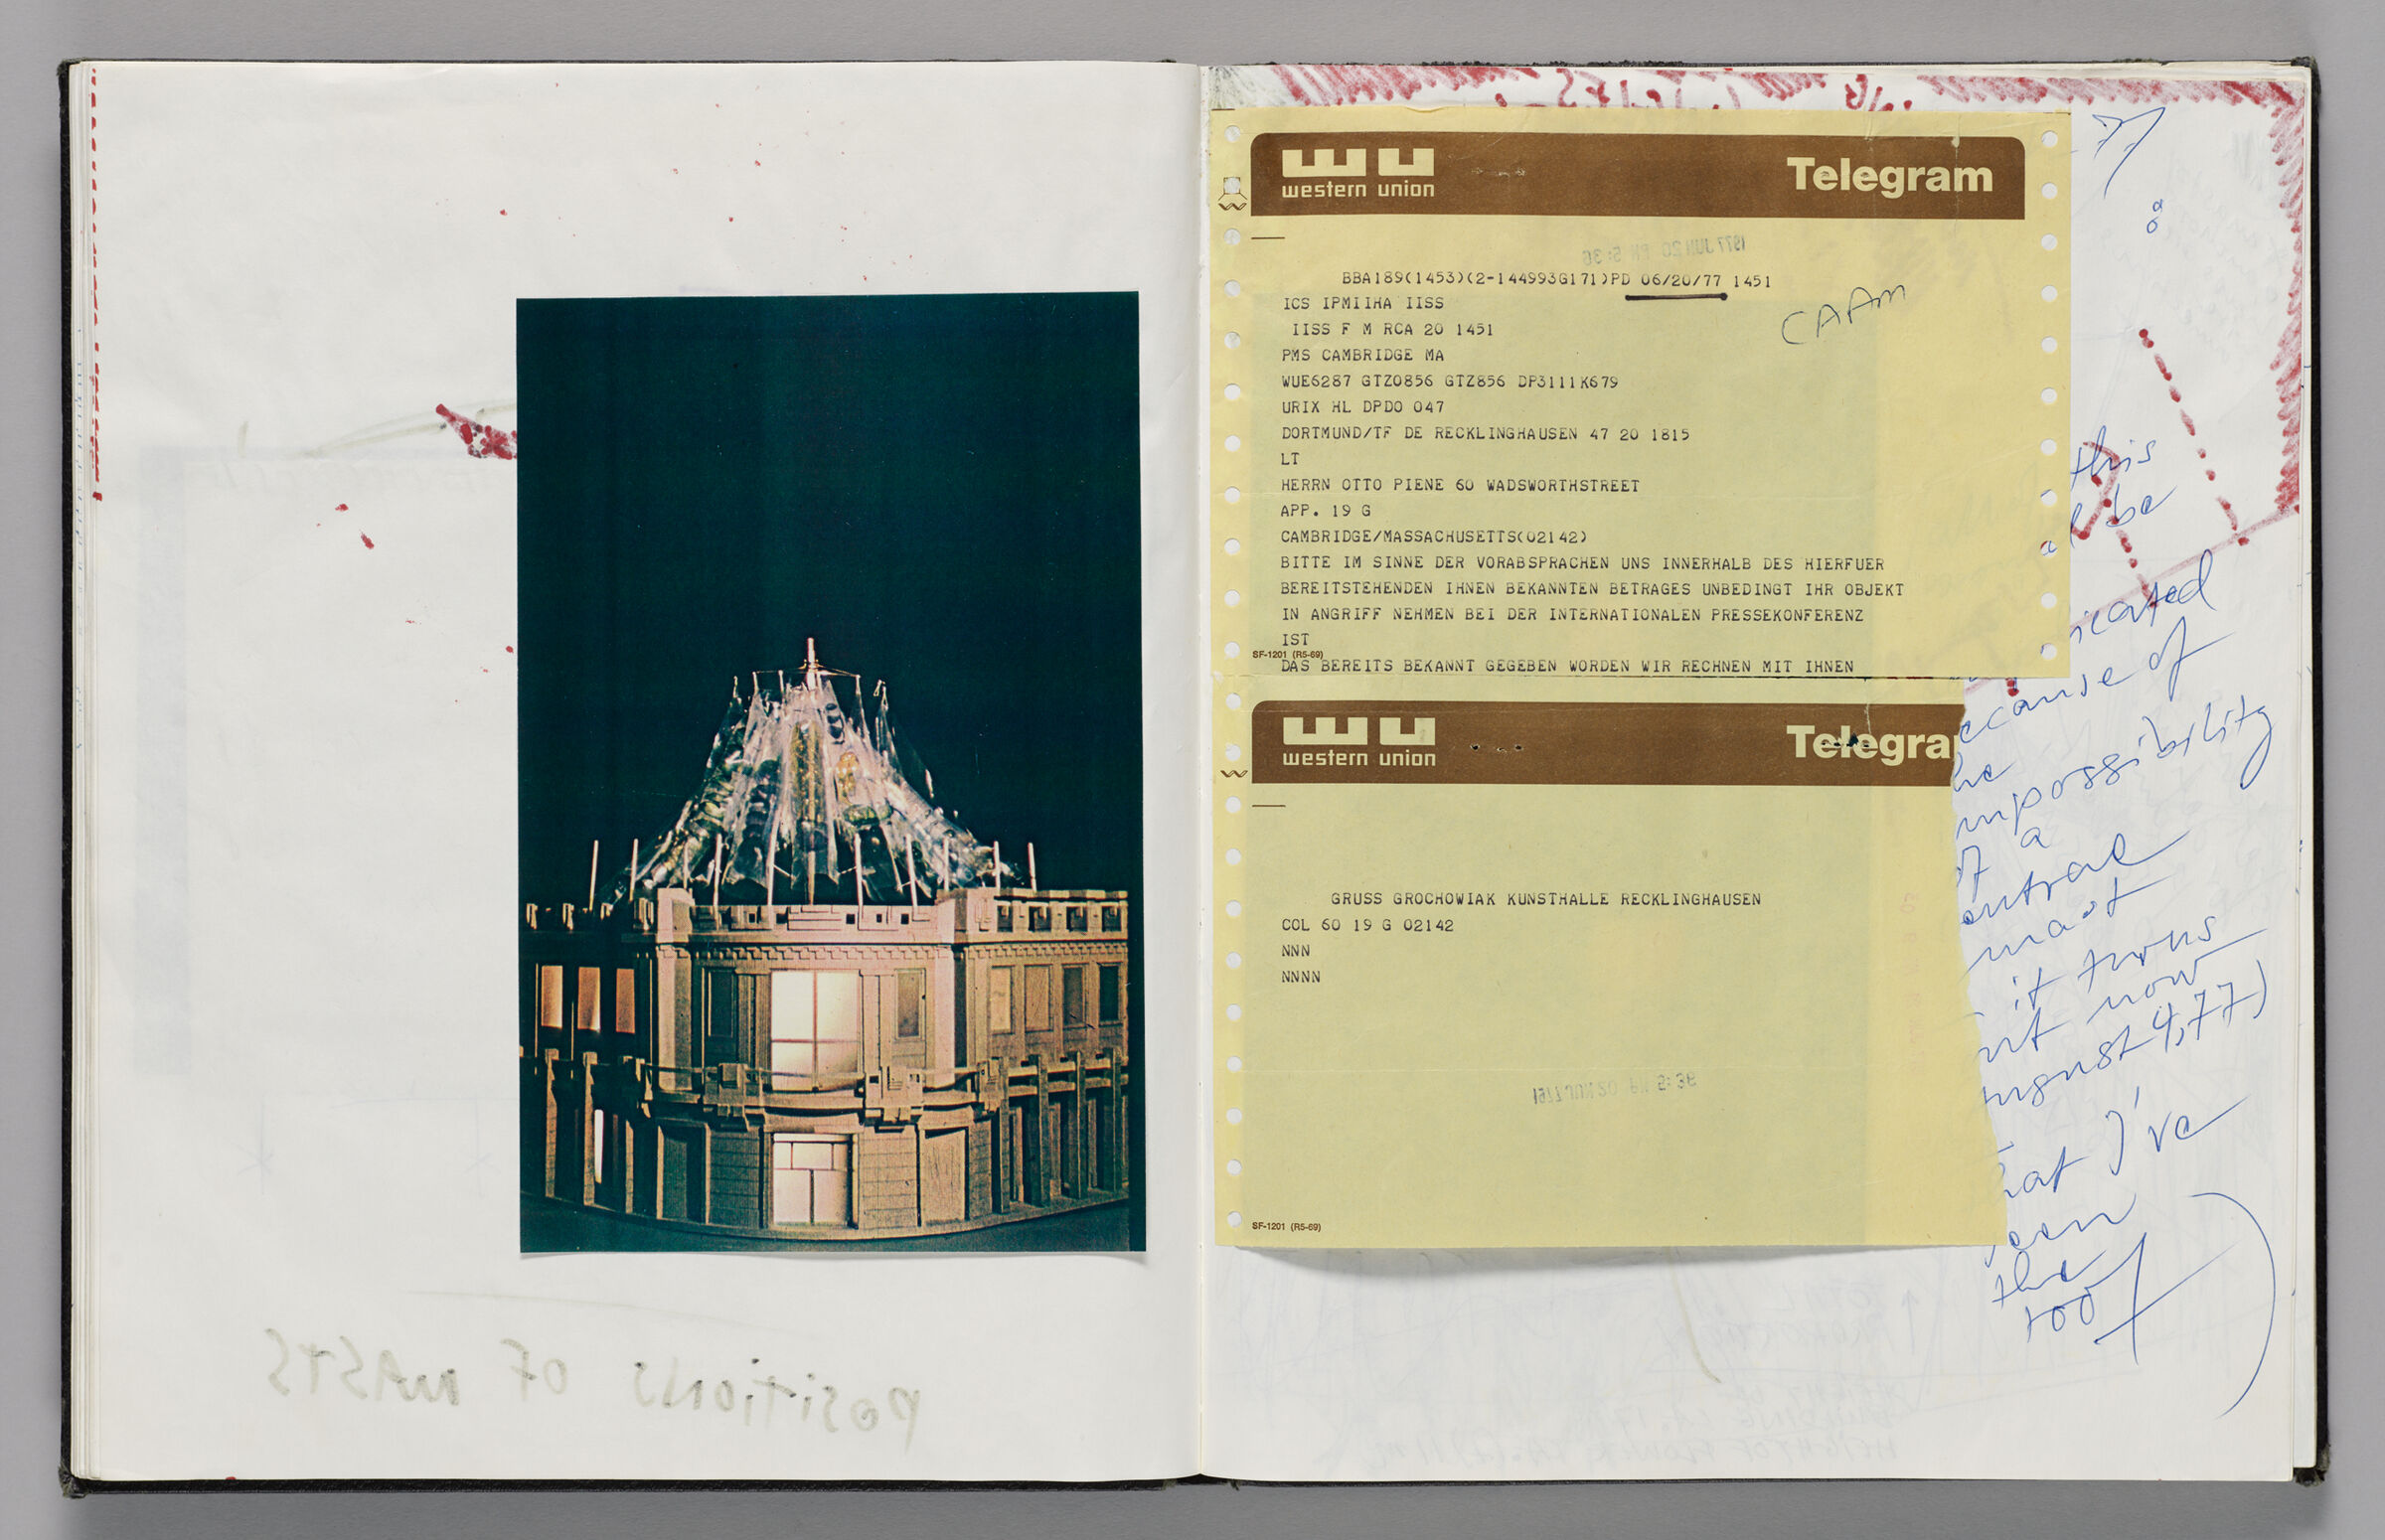 Untitled (Pasted Photograph, Left Page); Untitled (Pasted Photograph With Notes, Telegram Messages Pasted Atop, Right Page)